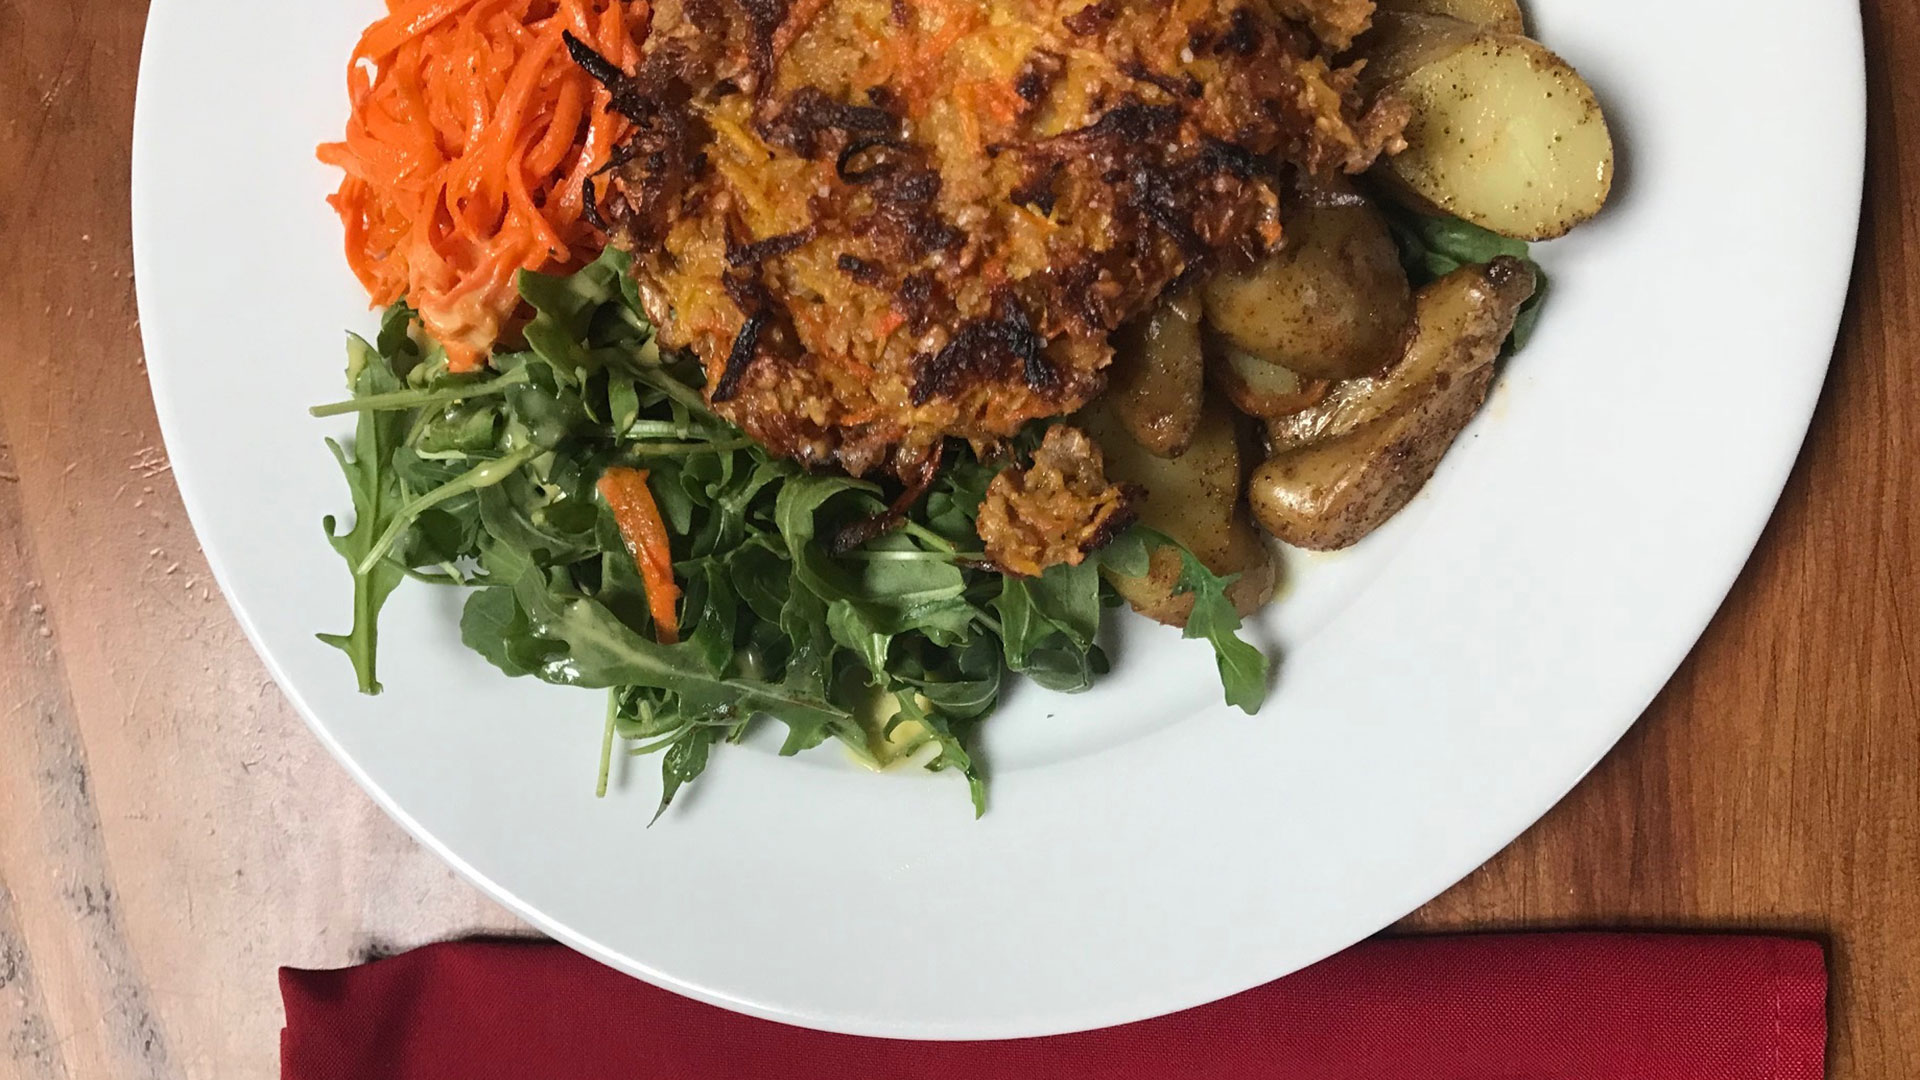 Pan-fried vegetable cake with greens and carrots on a white plate.